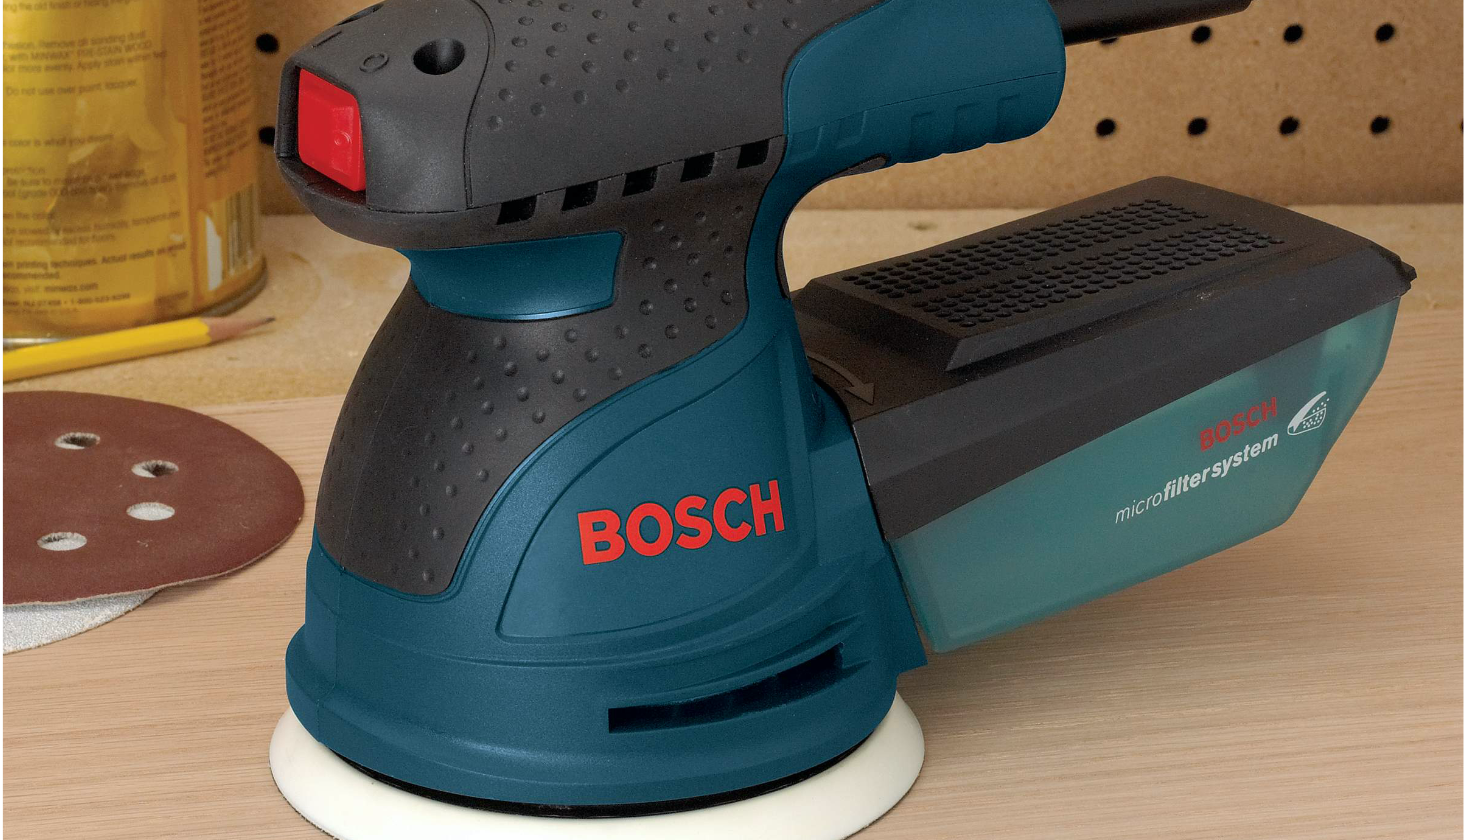 Bosch ROS10 Palm Sander and sanding disc on smooth wood surface.